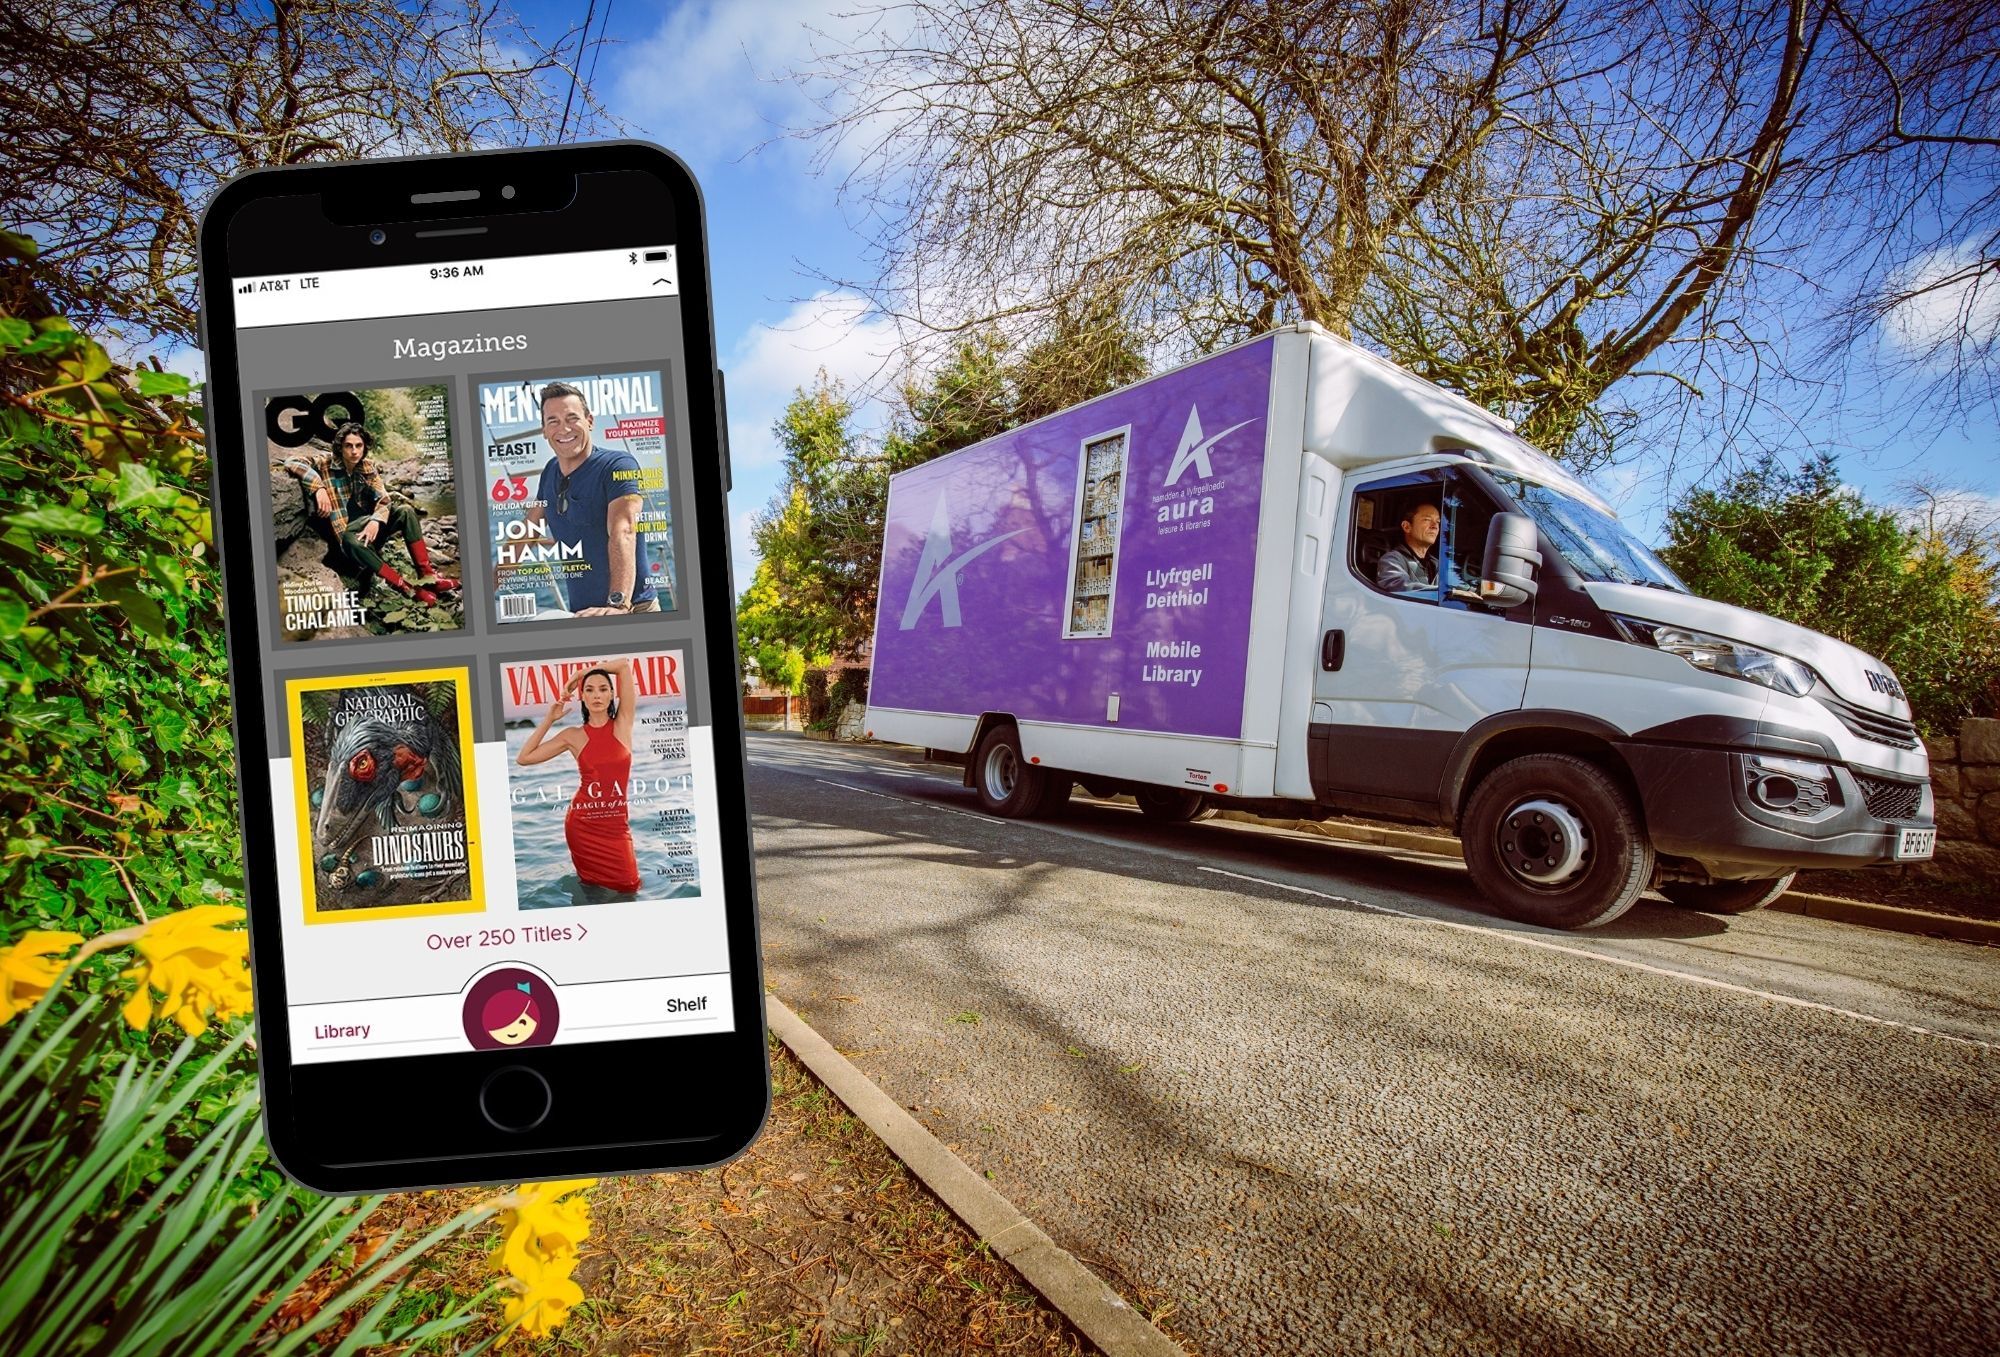 Aura Libraries Flintshire: mobile library returns, and access 3000 magazines